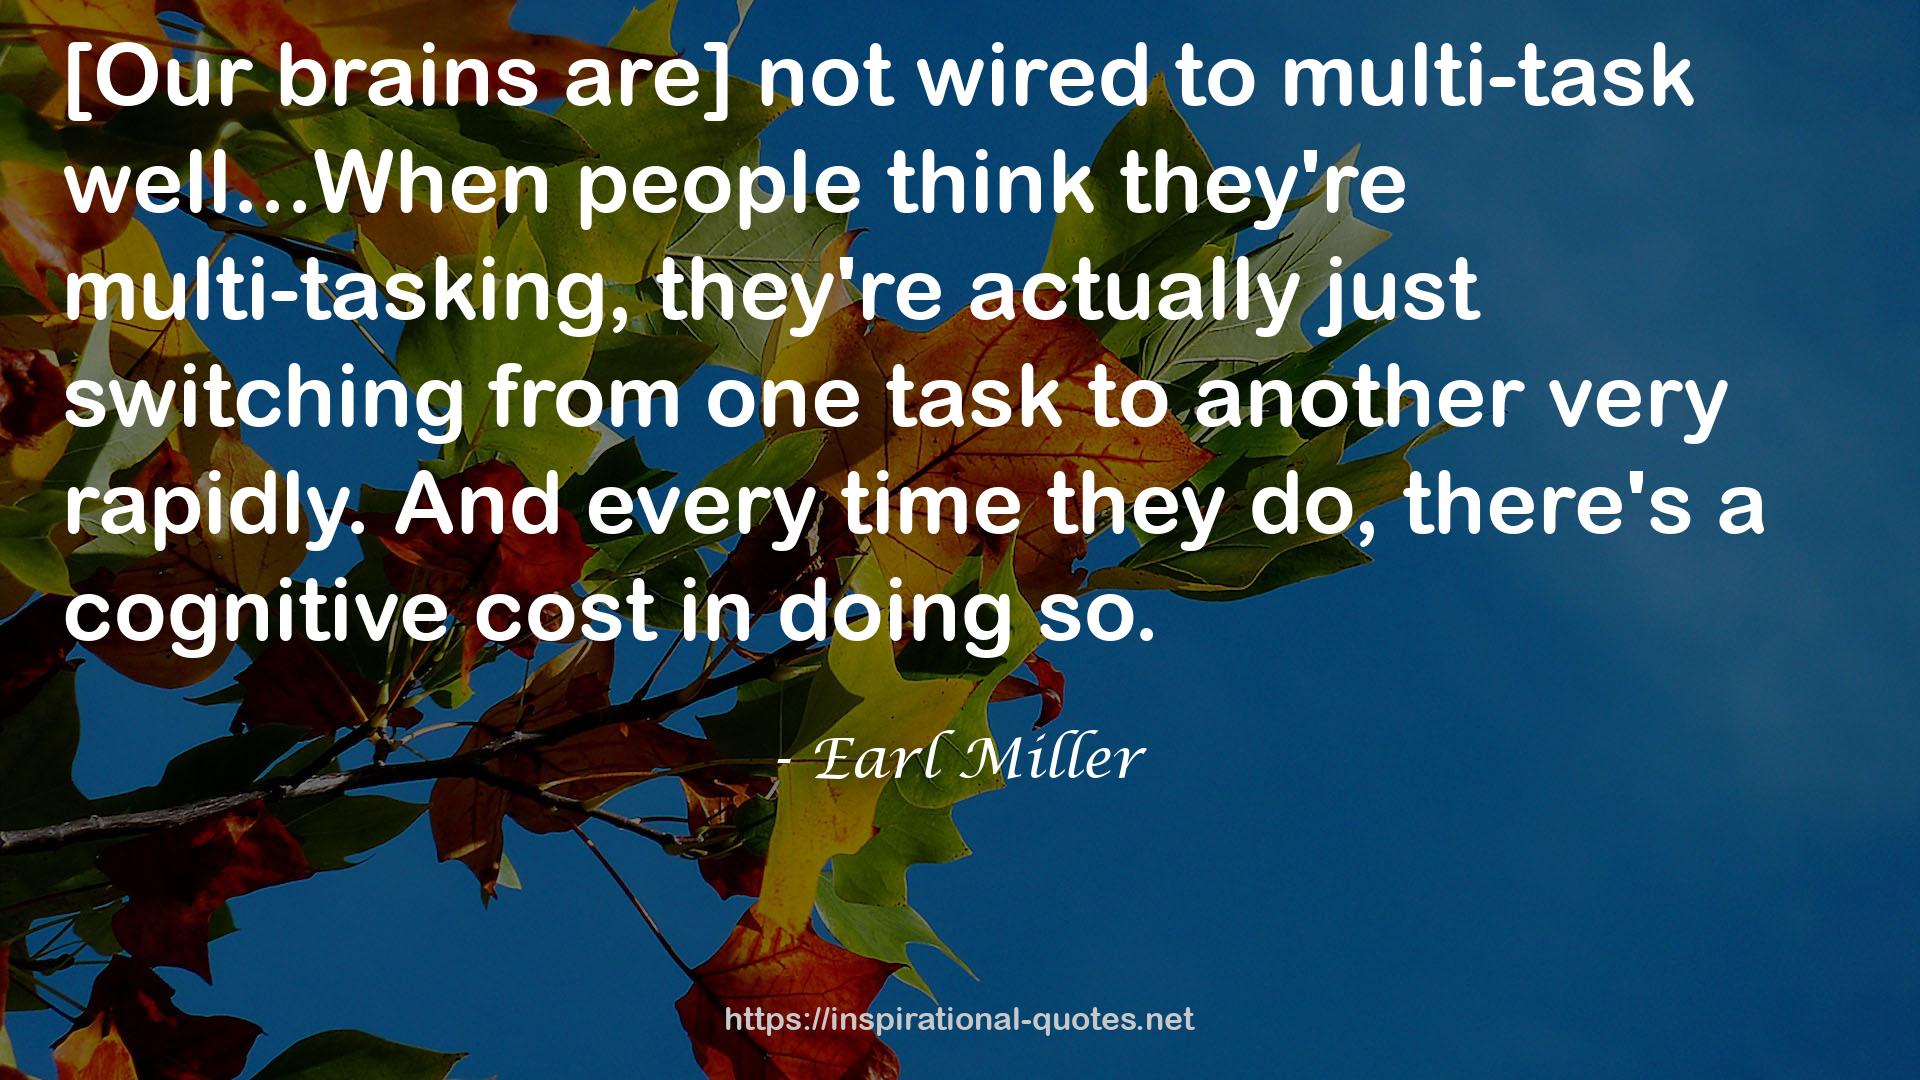 Earl Miller QUOTES